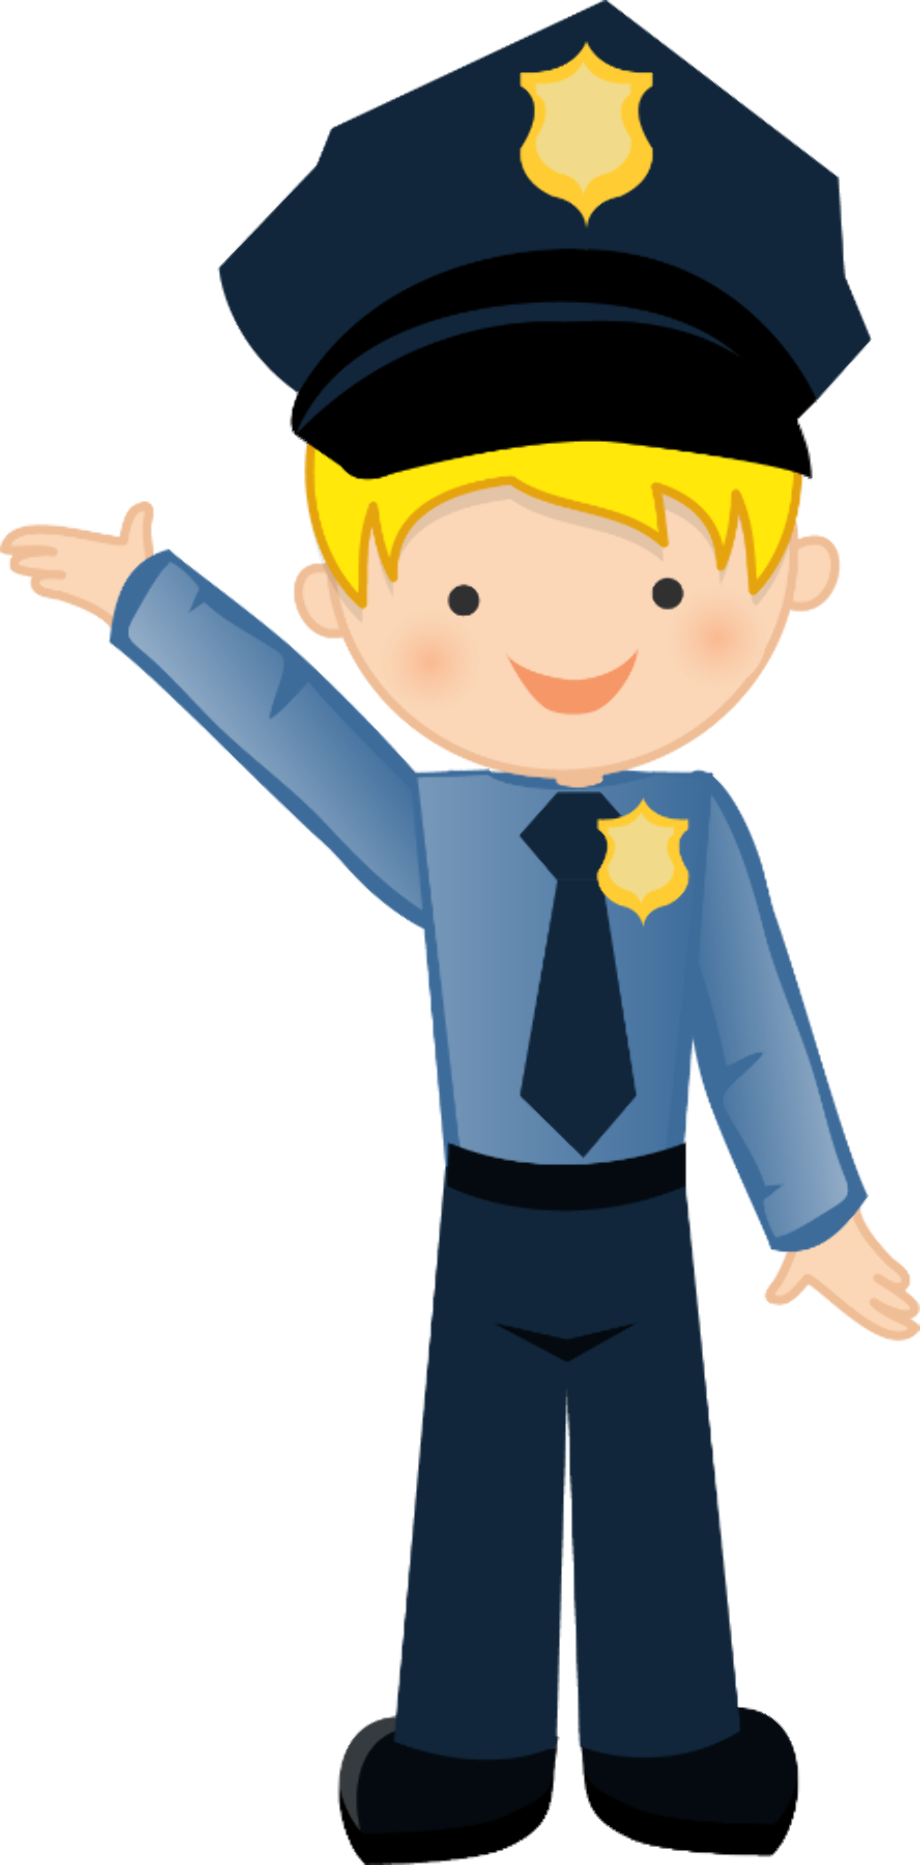 Download High Quality Police Officer Clipart Cute Transparent Png